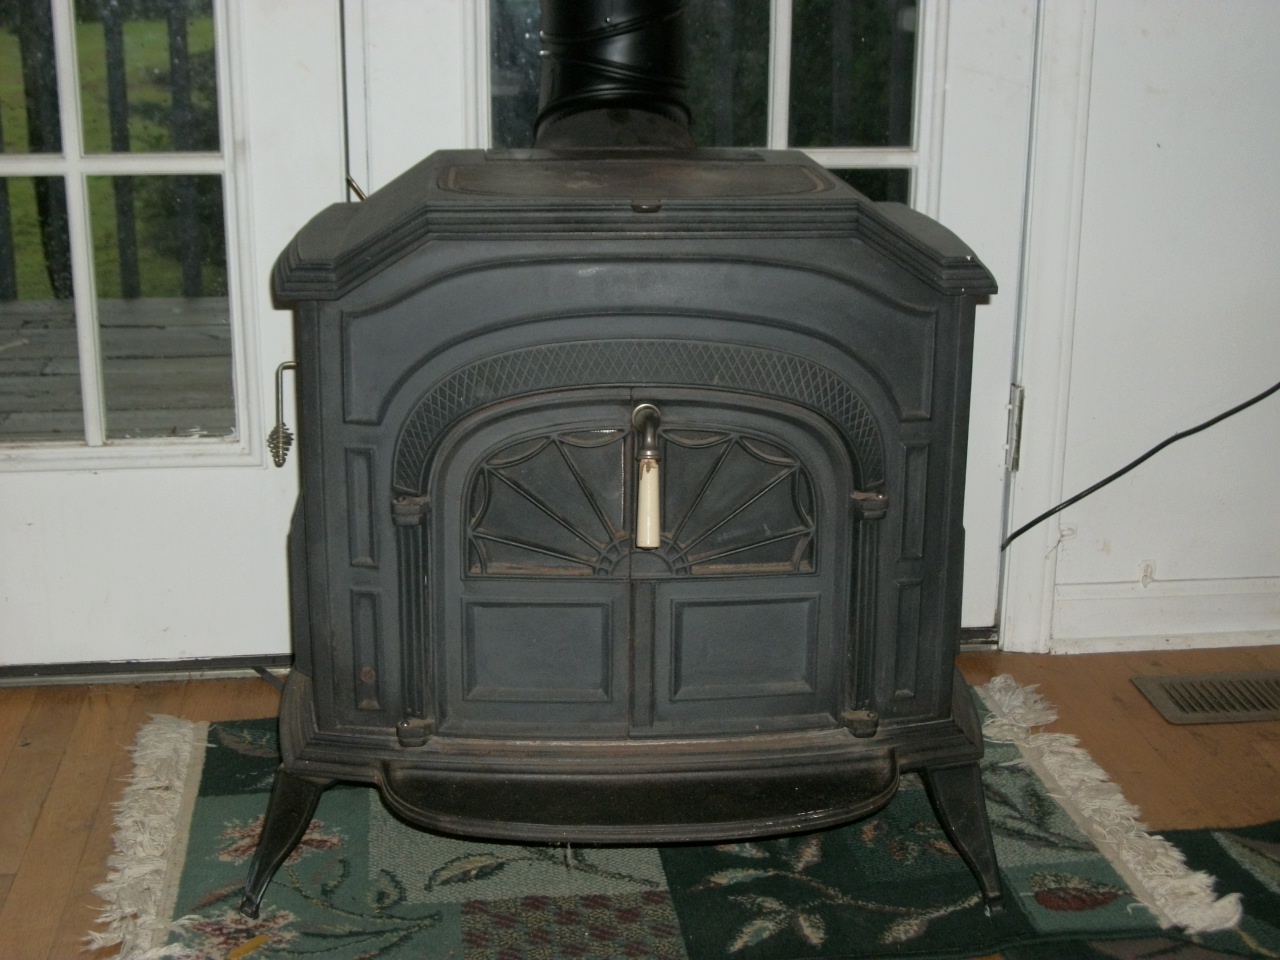 Craigslist Fireplaces for Sale Fresh Stoves for Sale Used Wood Stoves for Sale Craigslist